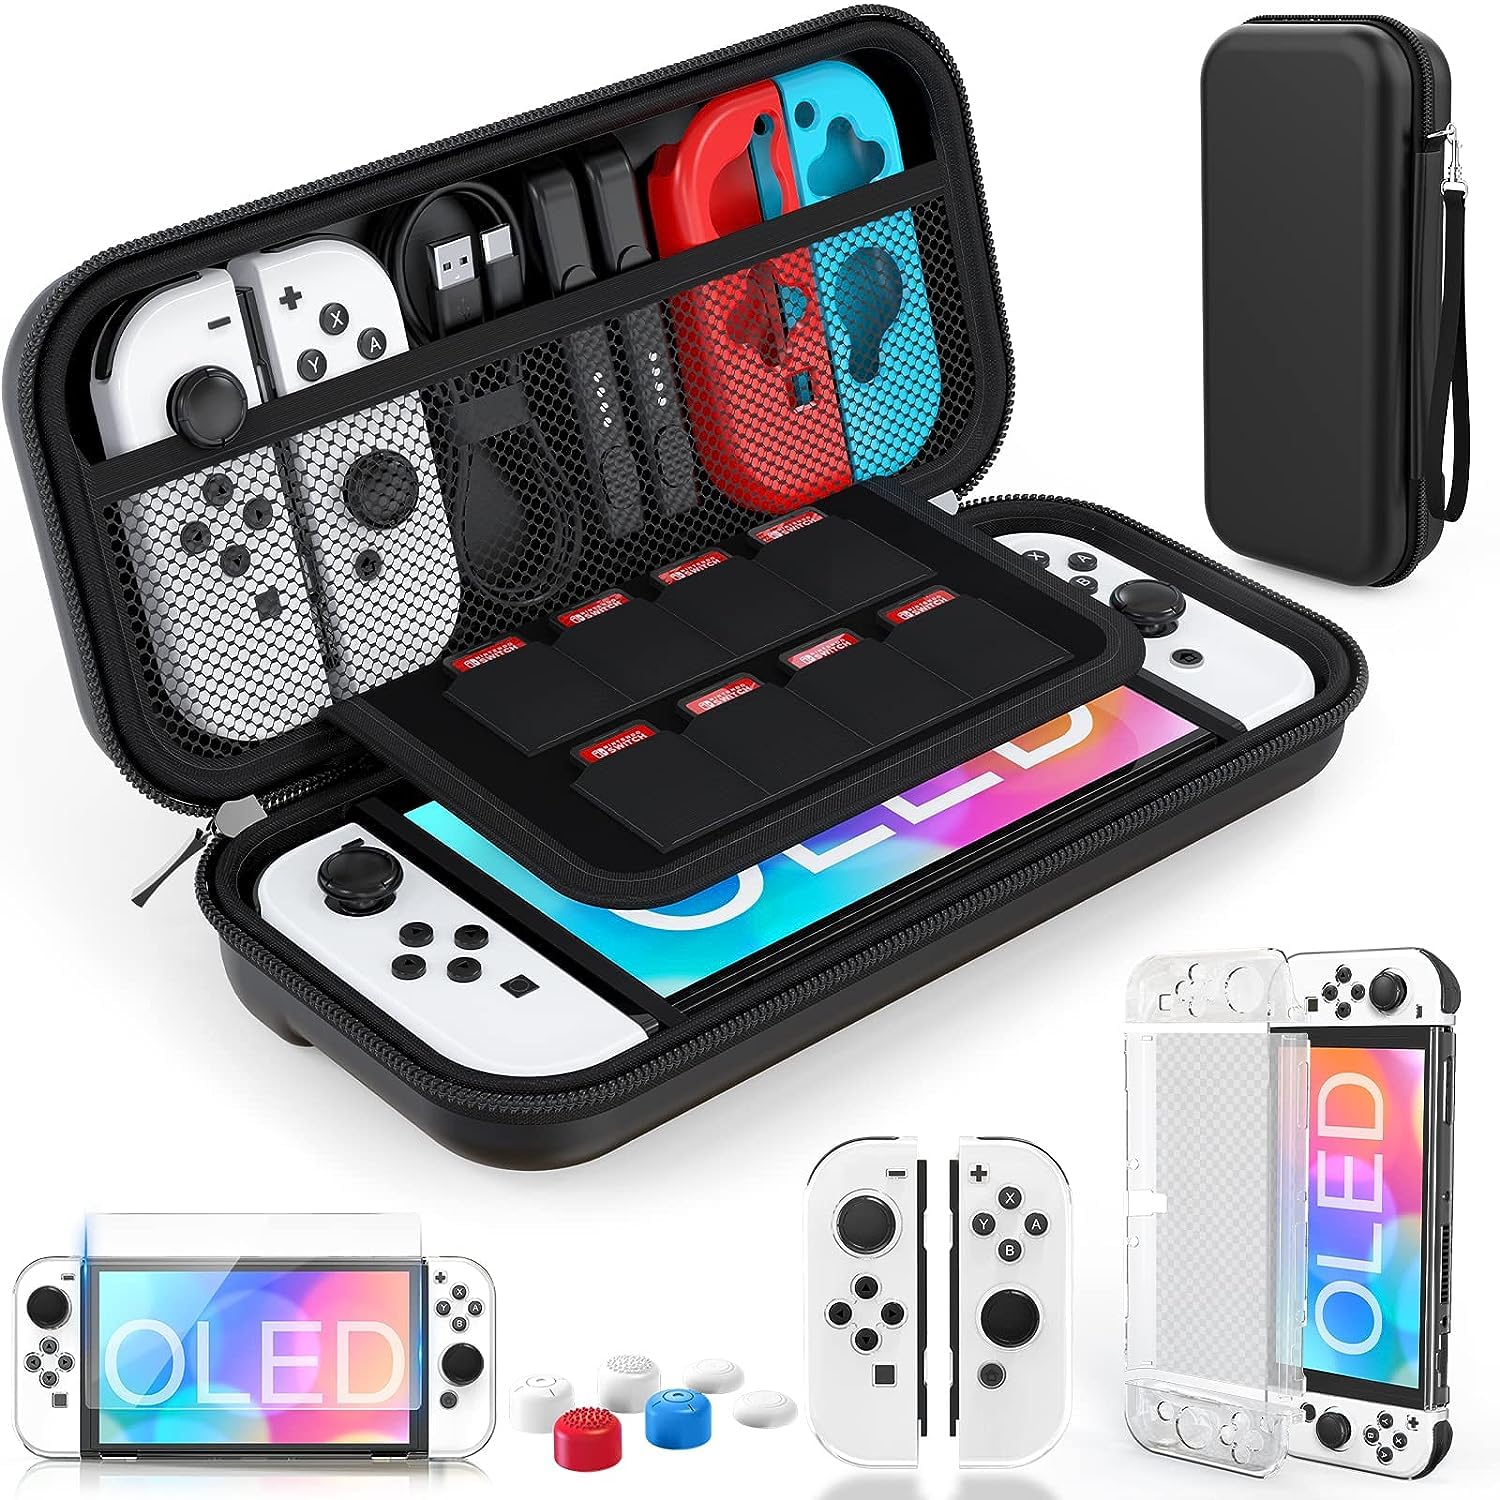 14 X HEYSTOP SWITCH OLED CASE FOR NINTENDO SWITCH OLED CARRY CASE POUCH ACCESSORIES WITH SWITCH OLED CLEAR COVER CASE TEMPERD GLASS SCREEN PROTECTOR AND 6 THUMB GRIPS CAPS FOR NINTENDO SWITCH OLED MO